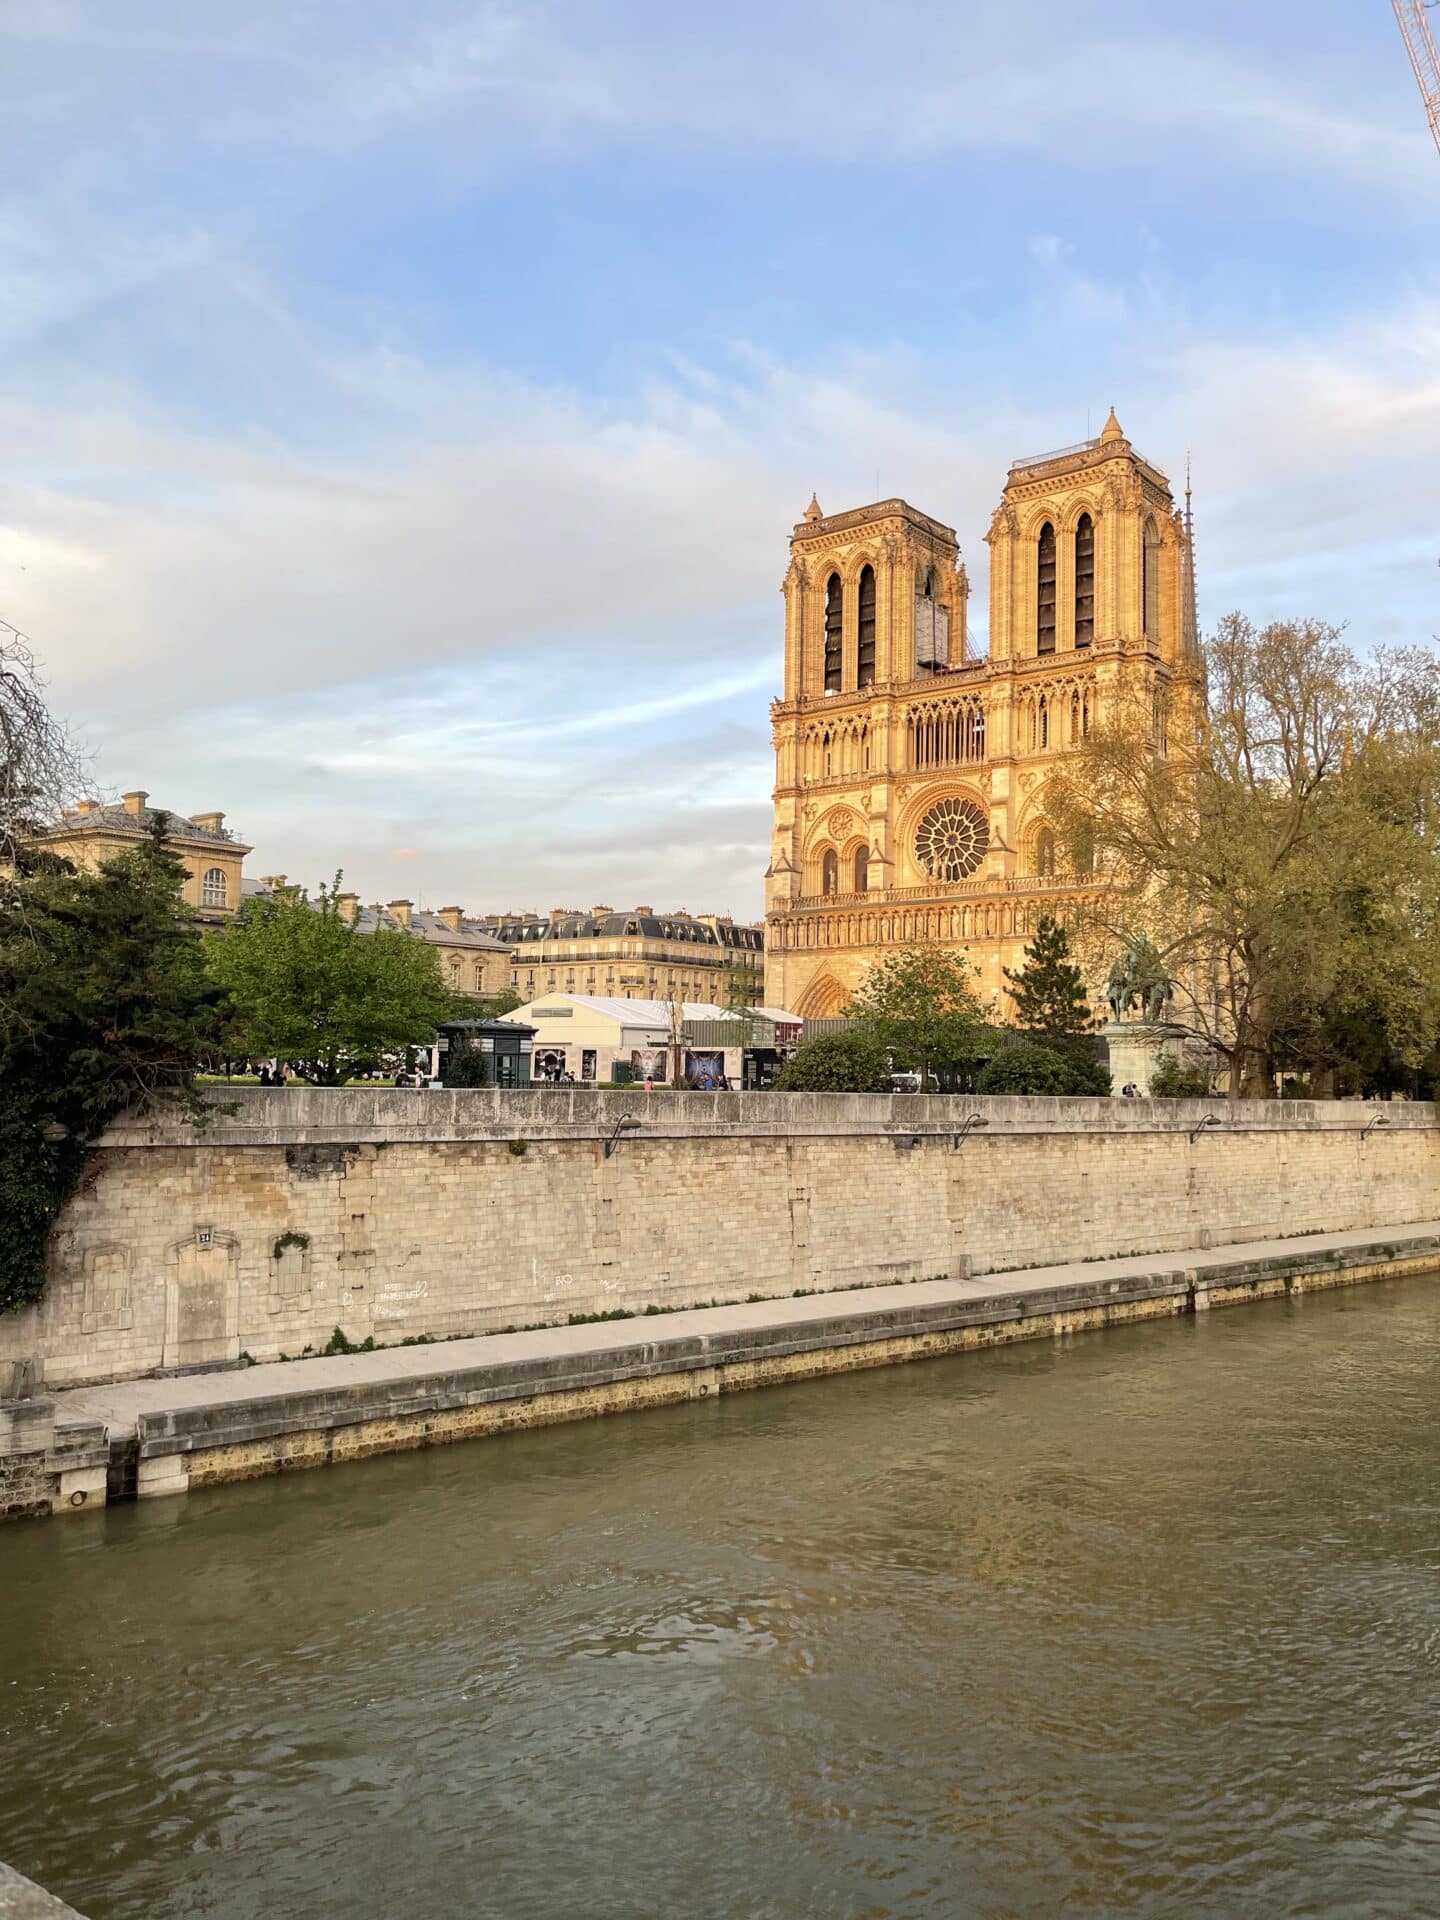 A serene image capturing Notre Dame Cathedral at sunset. The golden hue of the setting sun highlights the intricate facade and twin bell towers of the cathedral, contrasting beautifully with the soft blue sky. The Seine River in the foreground reflects the warm colors, enhancing the peaceful yet majestic atmosphere of this historic landmark.